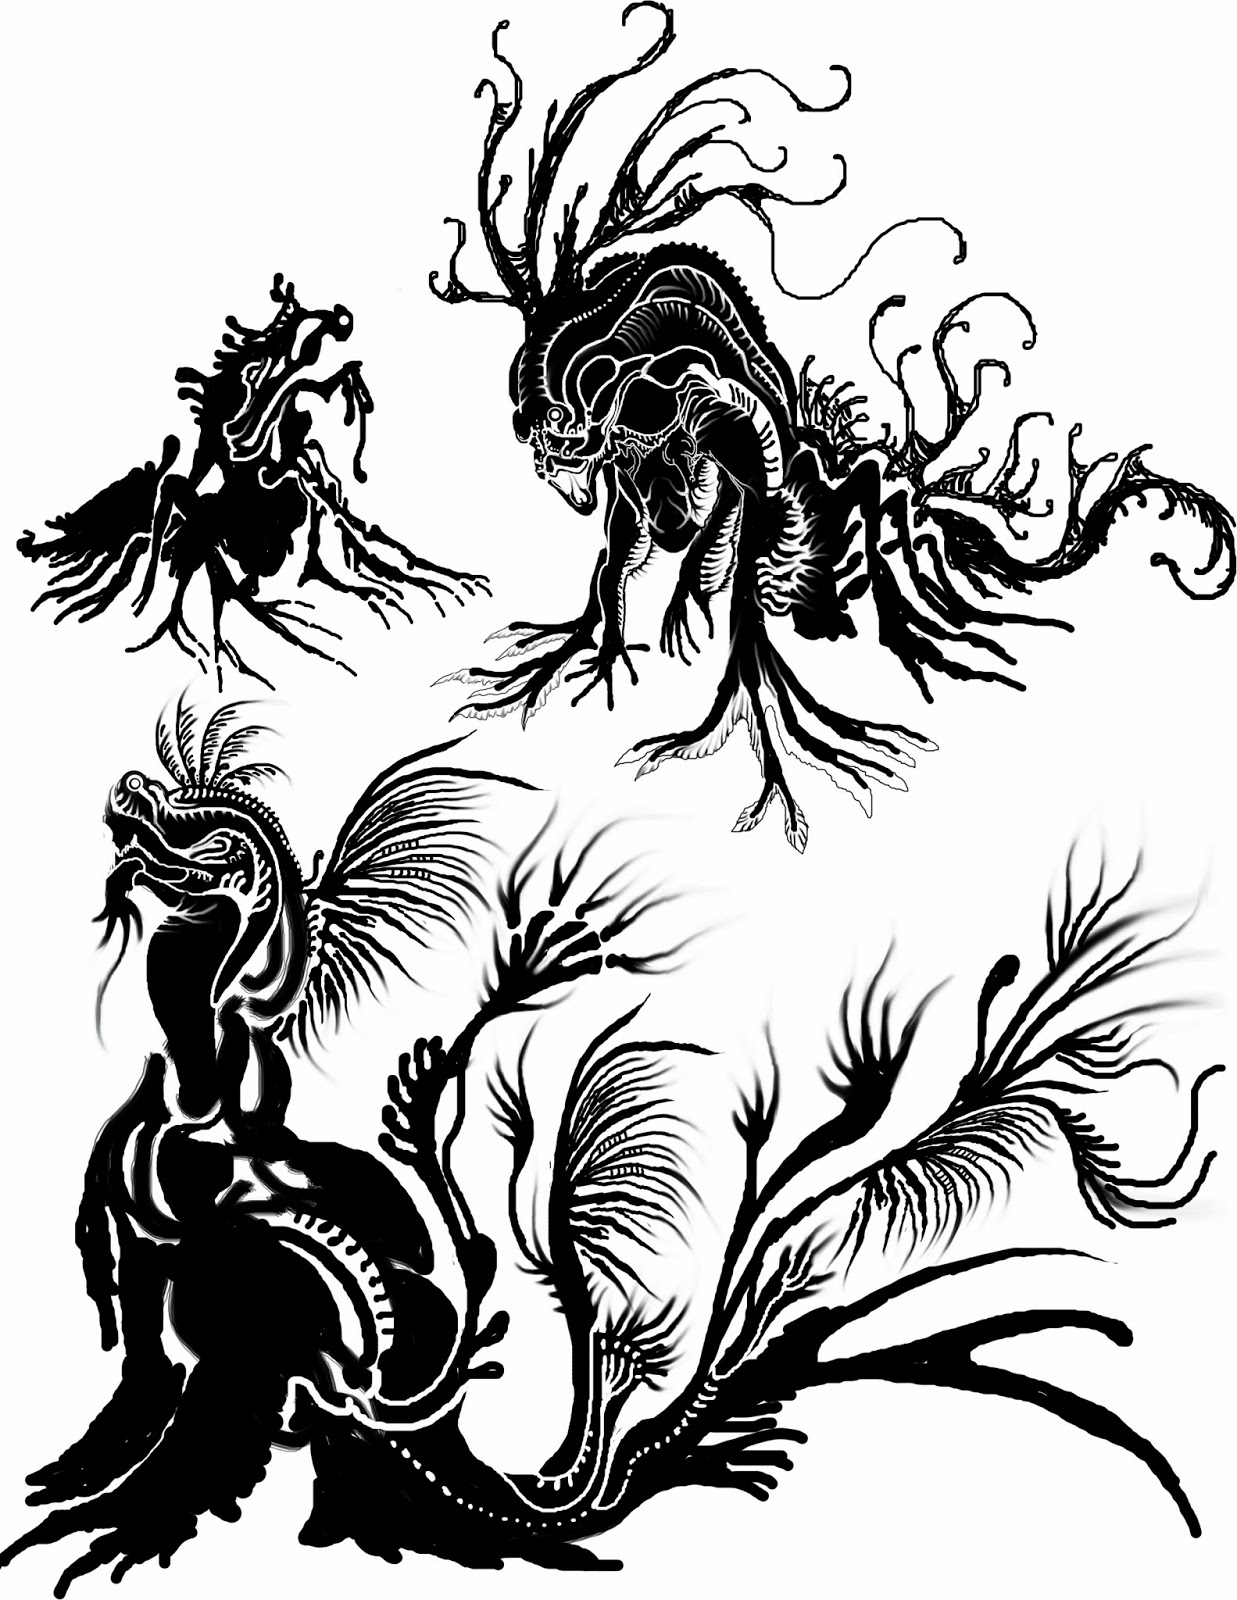 Sea Dragon Drawing - ClipArt Best